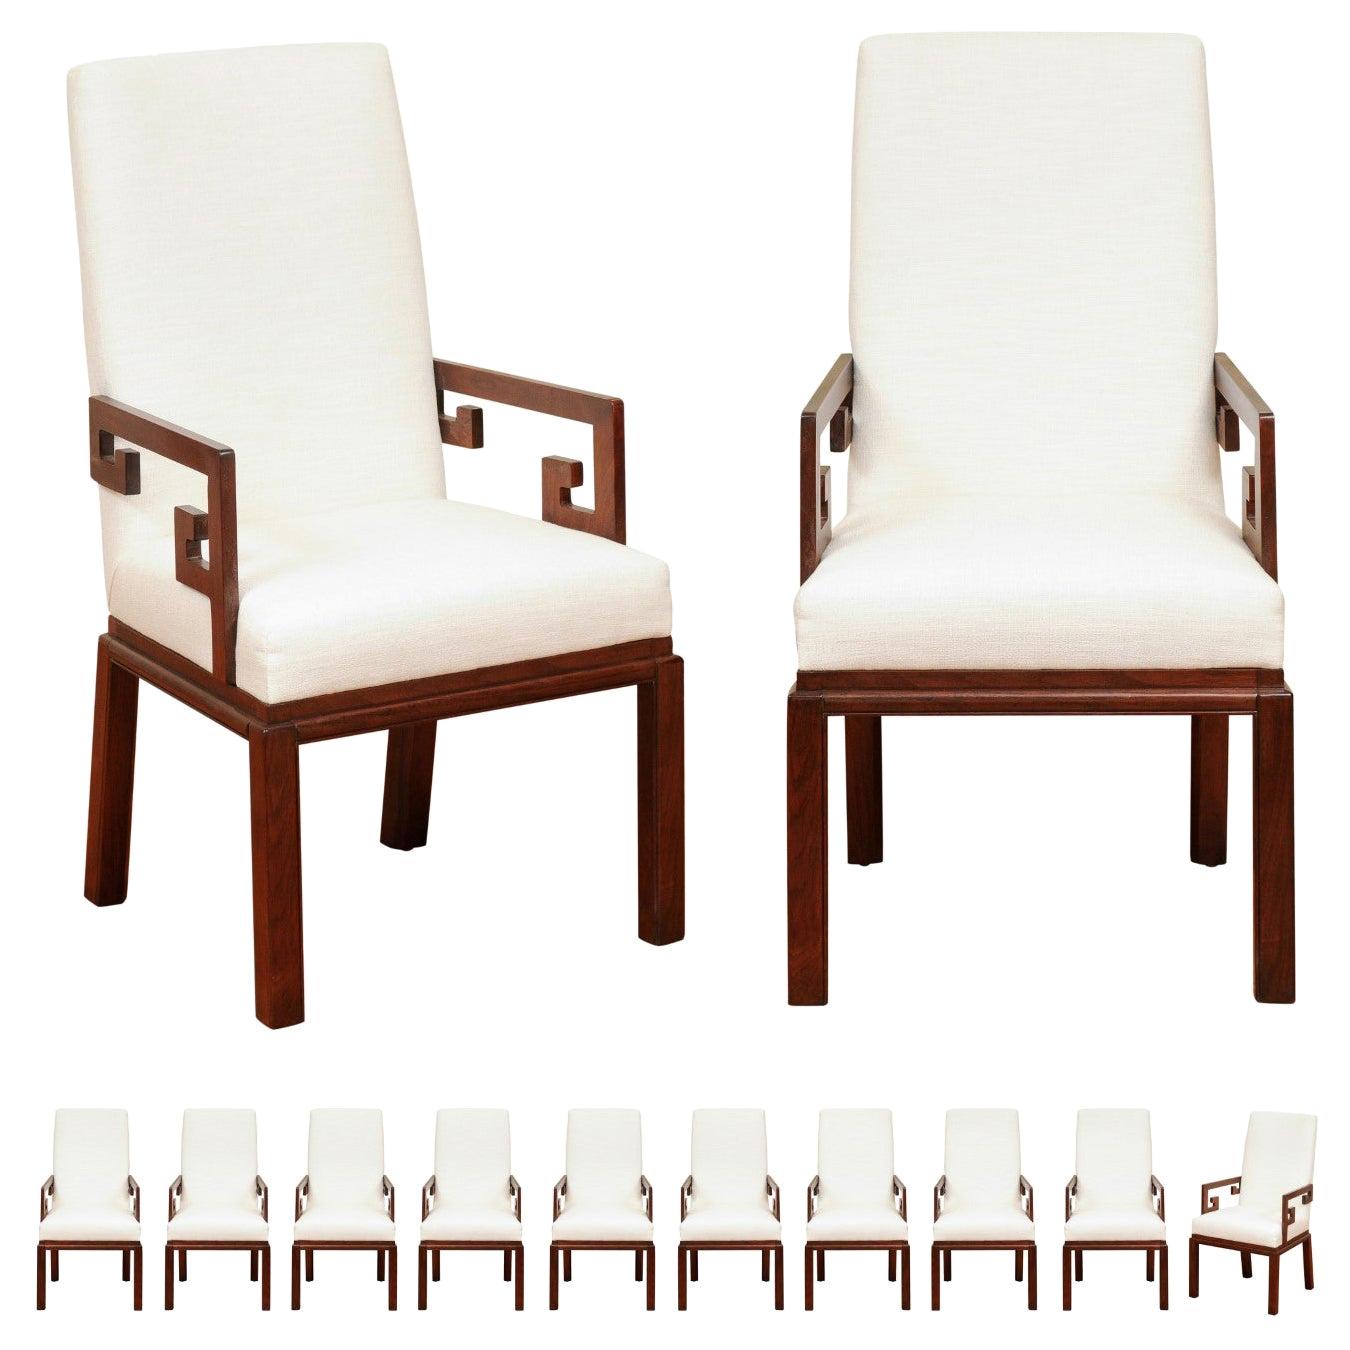 All Arms, Sublime Set of 16 Greek Key Chairs by Michael Taylor, circa 1970